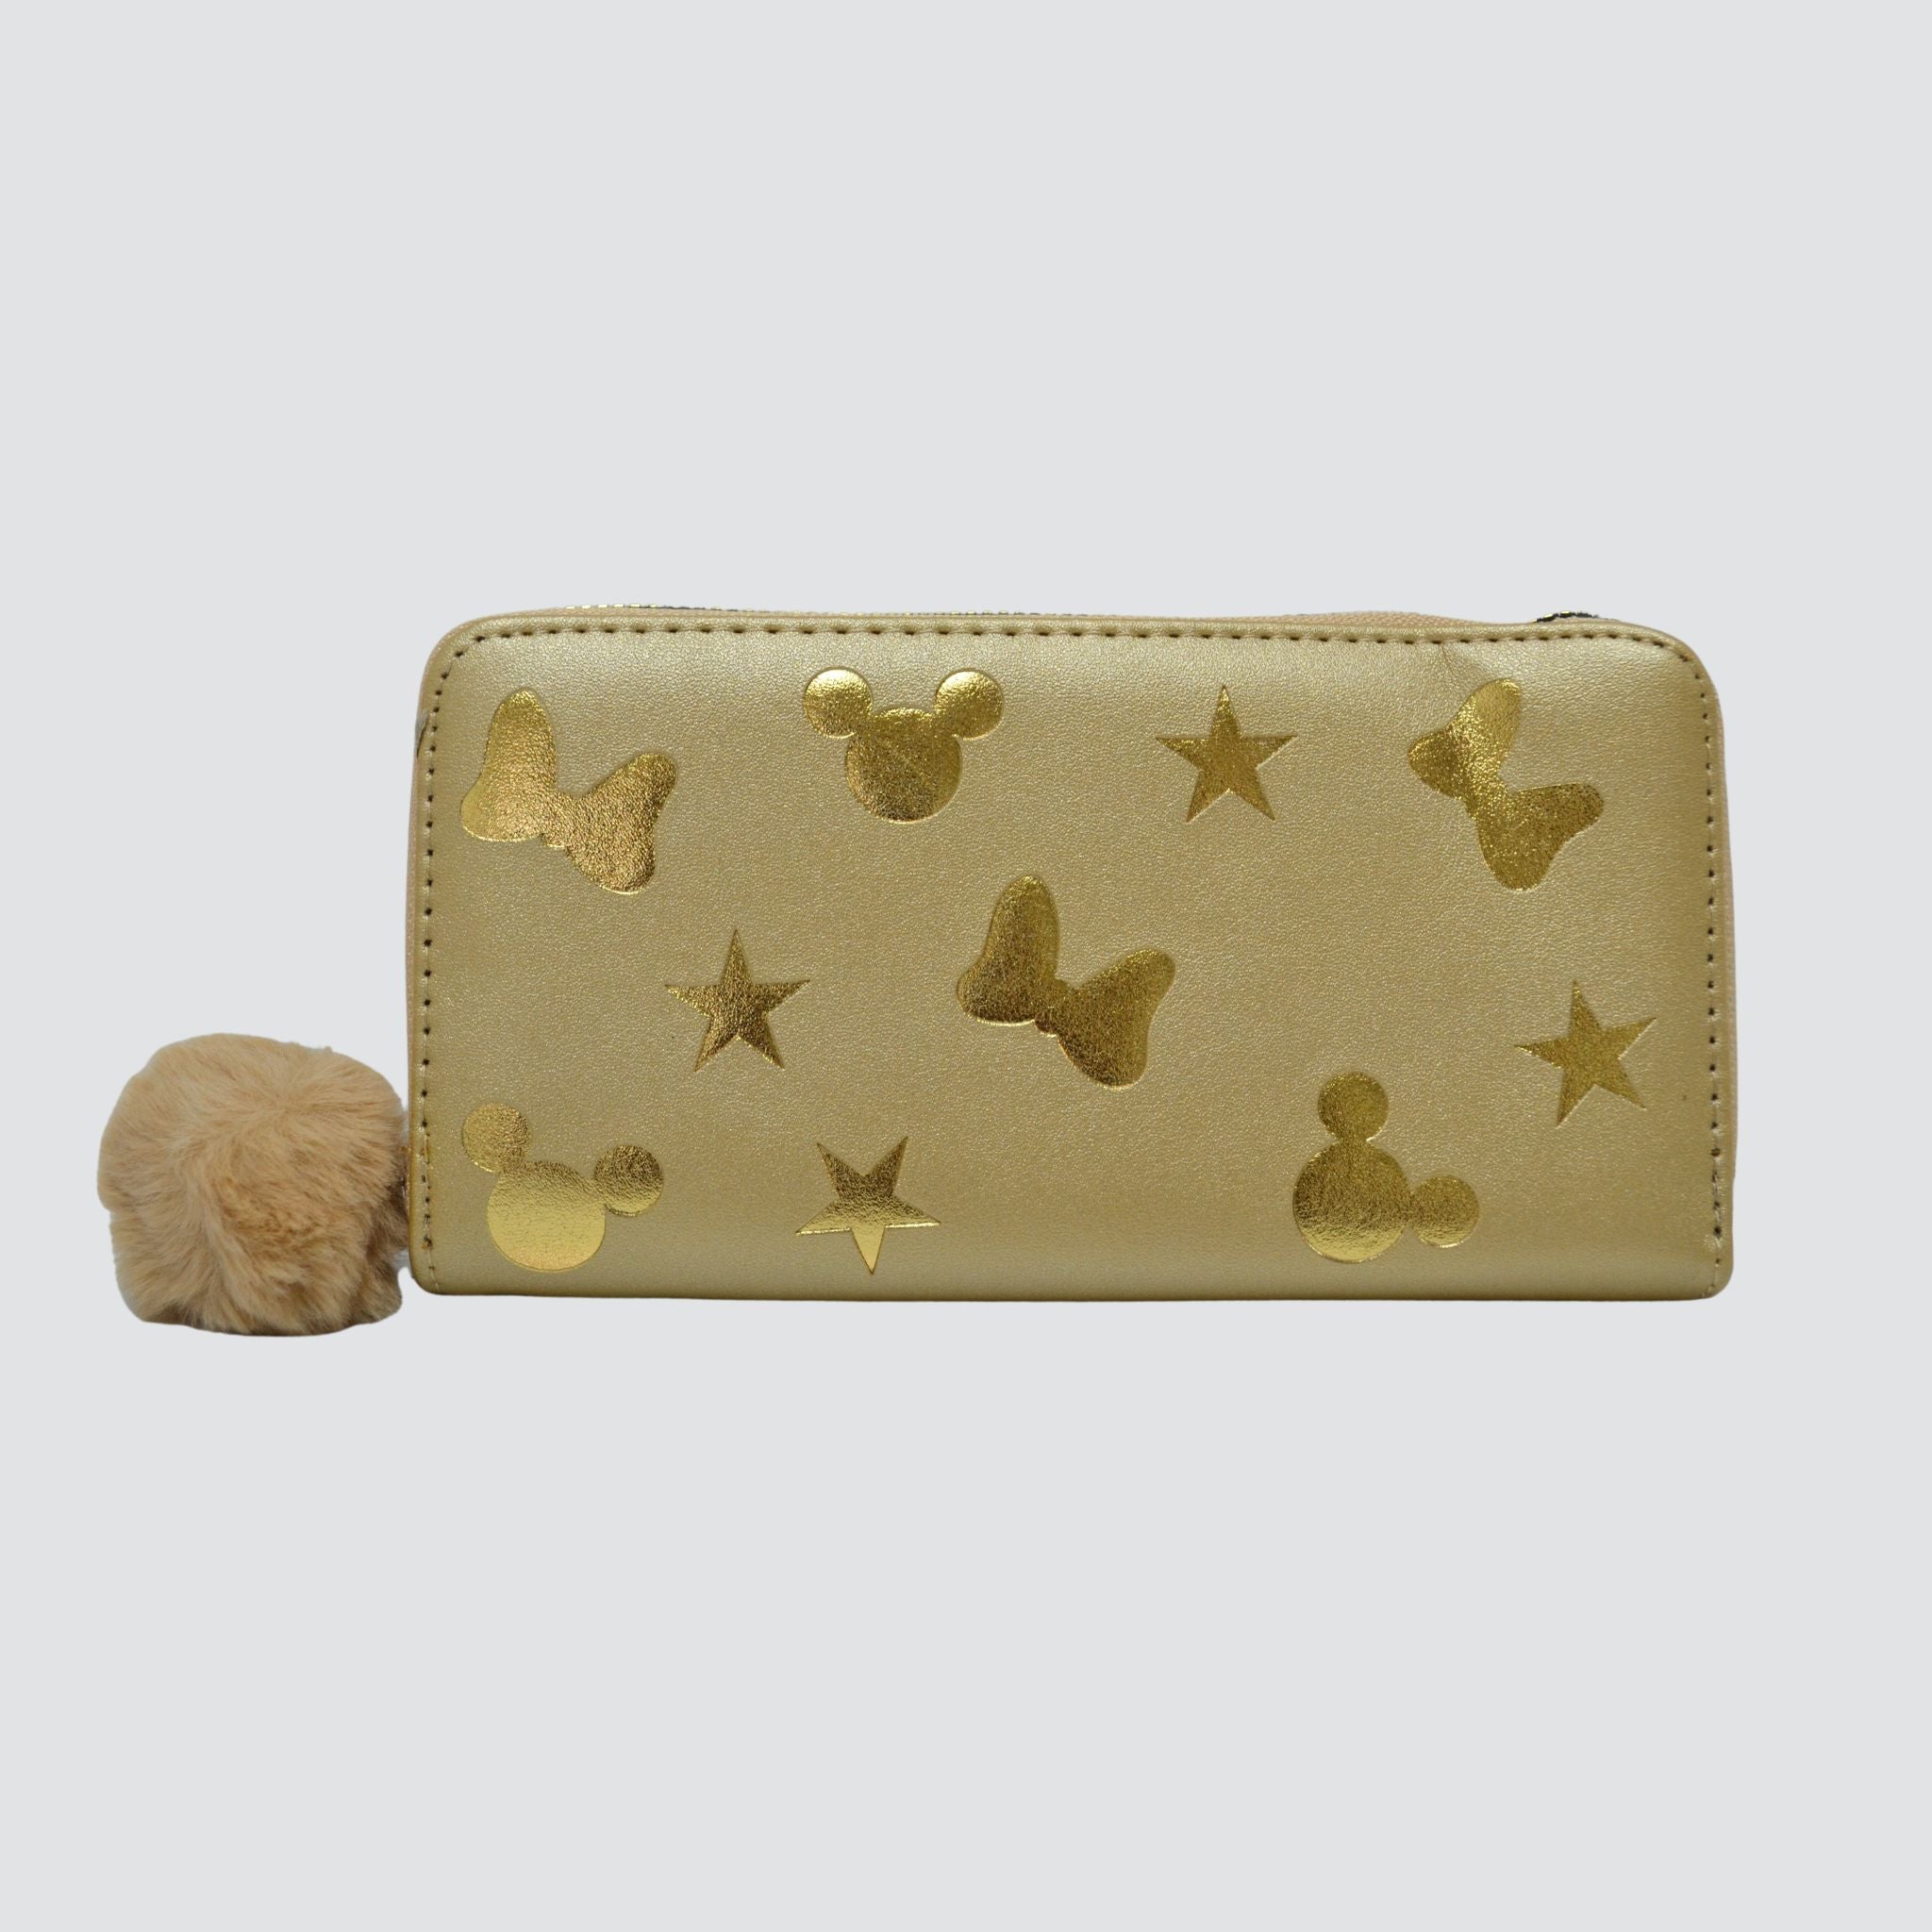 S3414 Mickey Mouse Wallet